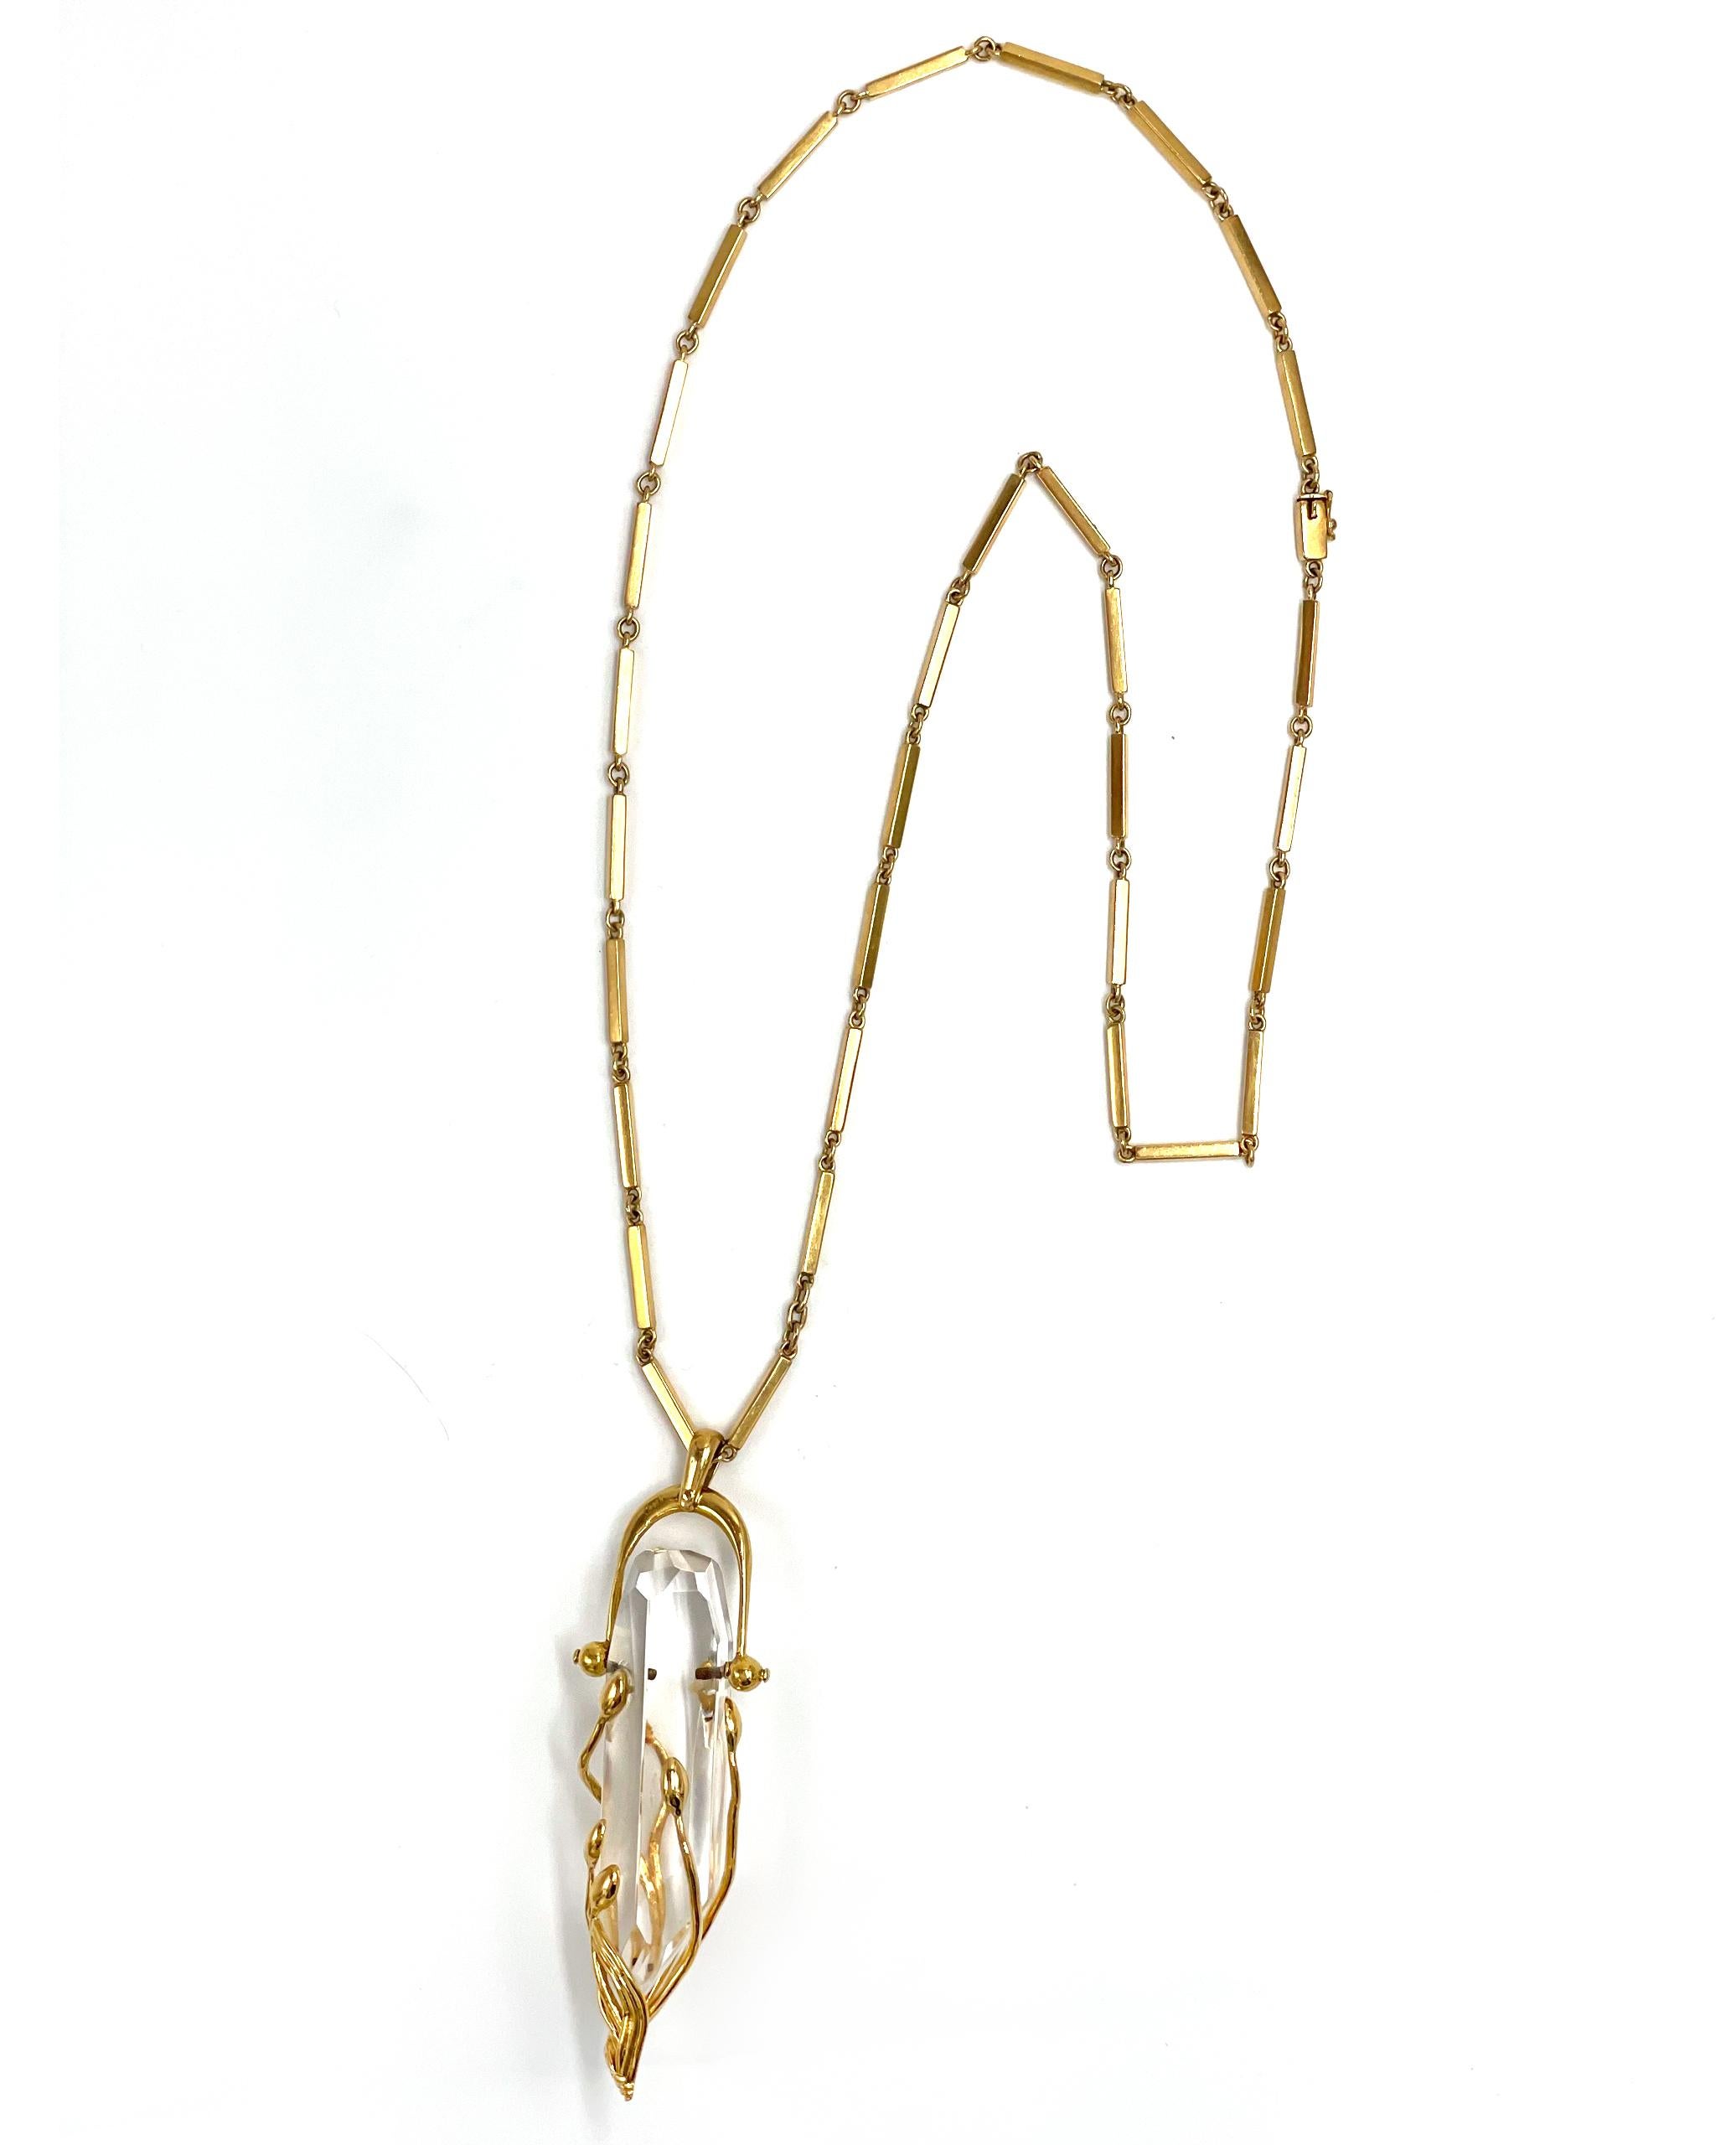 Pre owned vintage estate hand crafted 18K yellow gold quartz crystal necklace.  The unique pendant frame consists of a faceted quartz crystal measuring approximately 58x16mm.  The crystal if fitted with an ornate cap and topped with a hinged loop. 